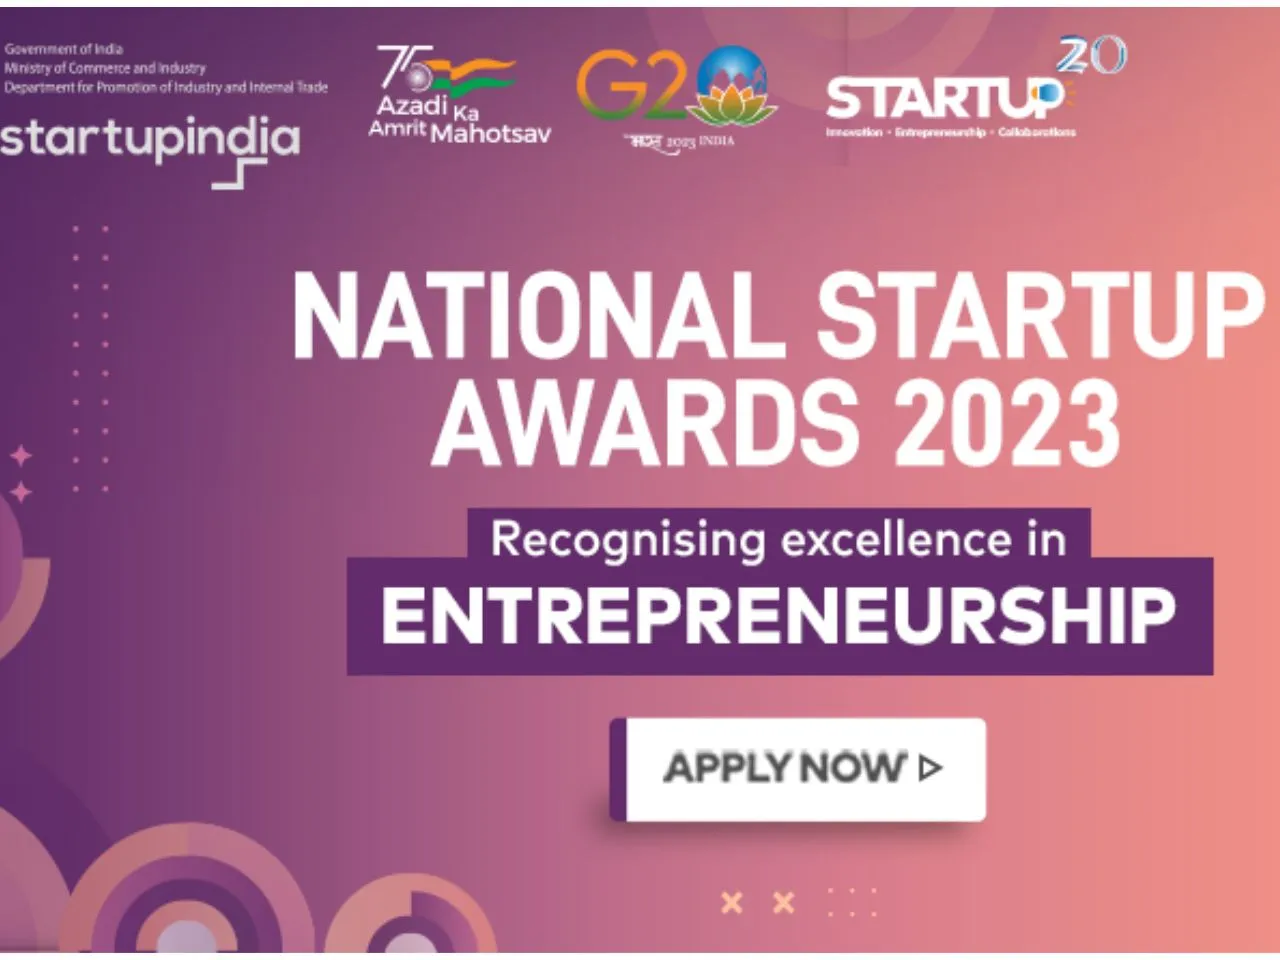 It’s Gear-up Time! DPIIT invites startups for National Startup Awards 2023